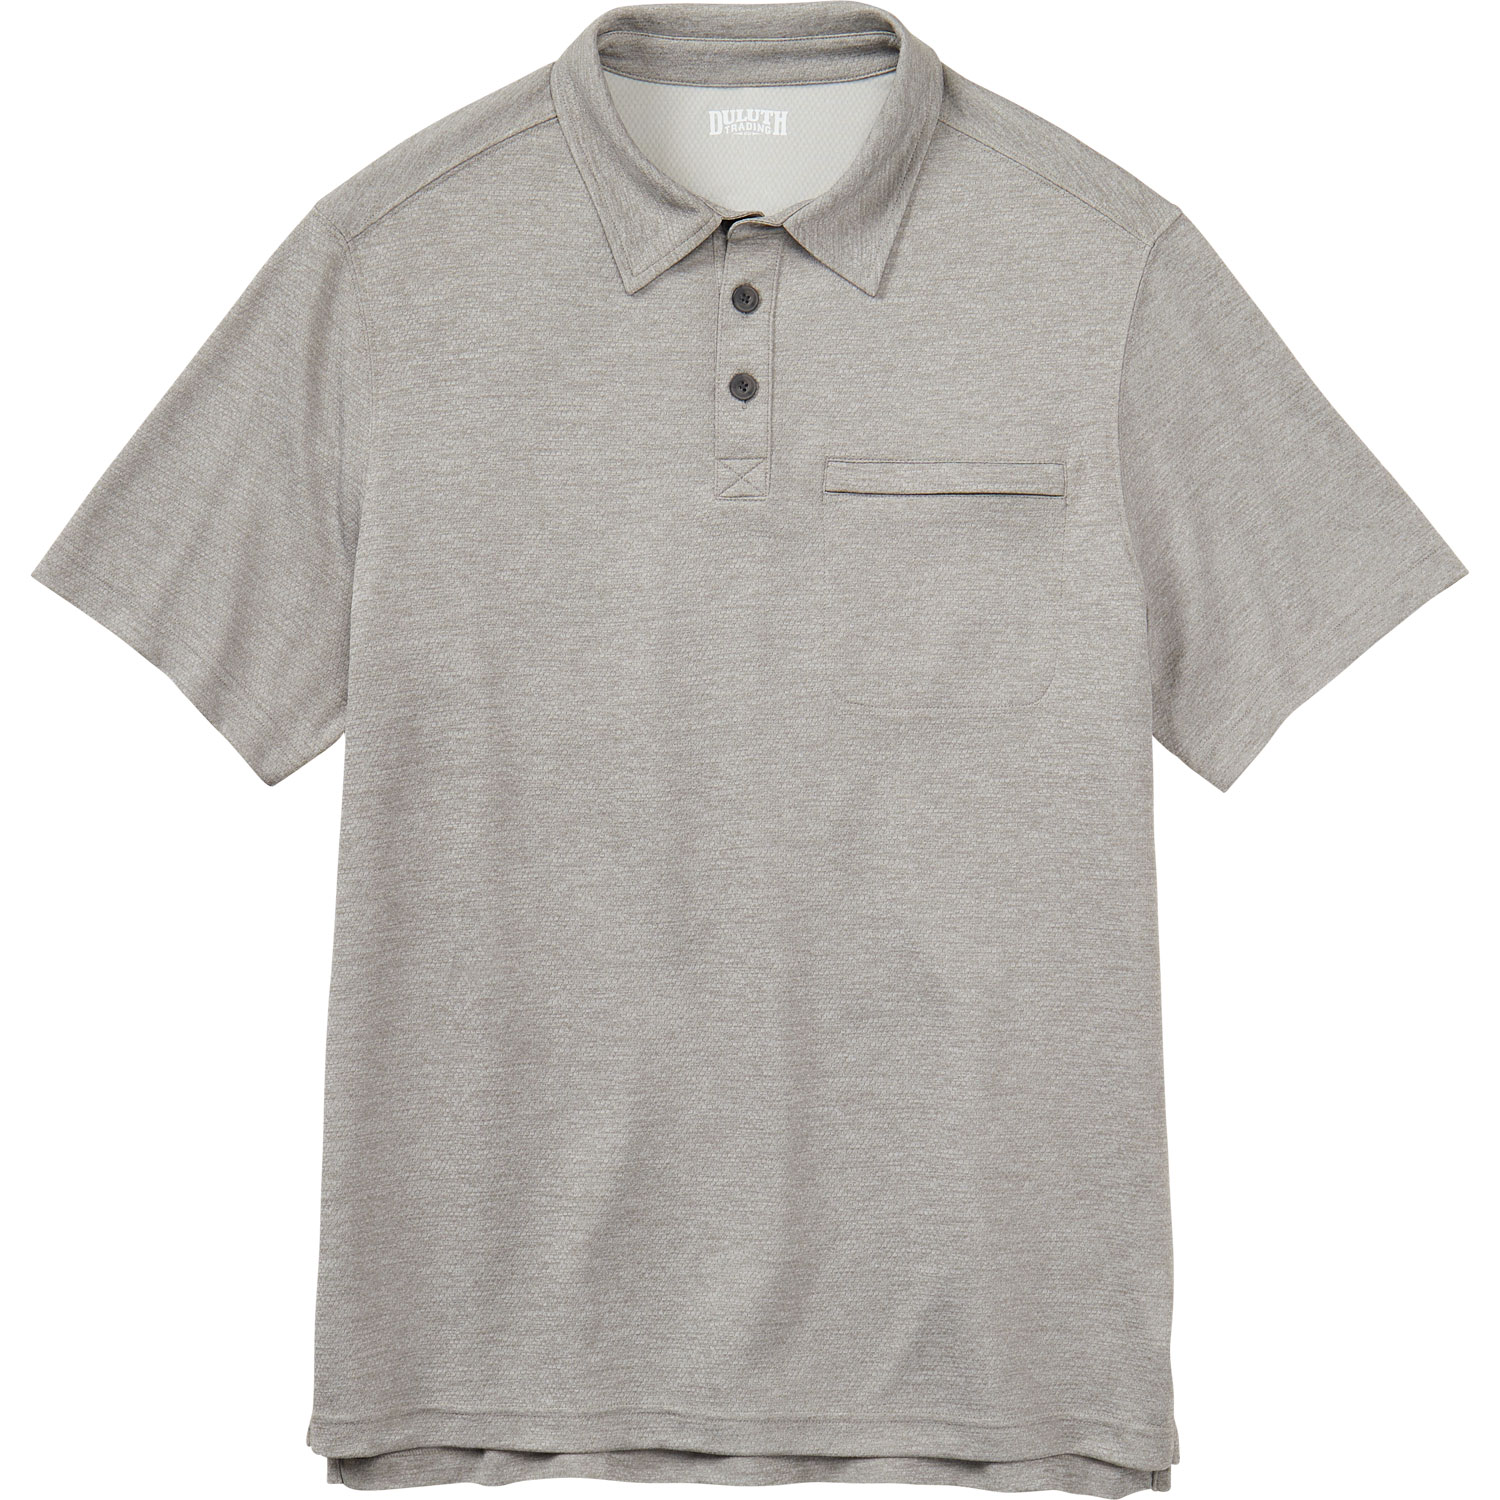 Men's Armachillo Cooling Short Sleeve Polo Shirt | Duluth Trading Company